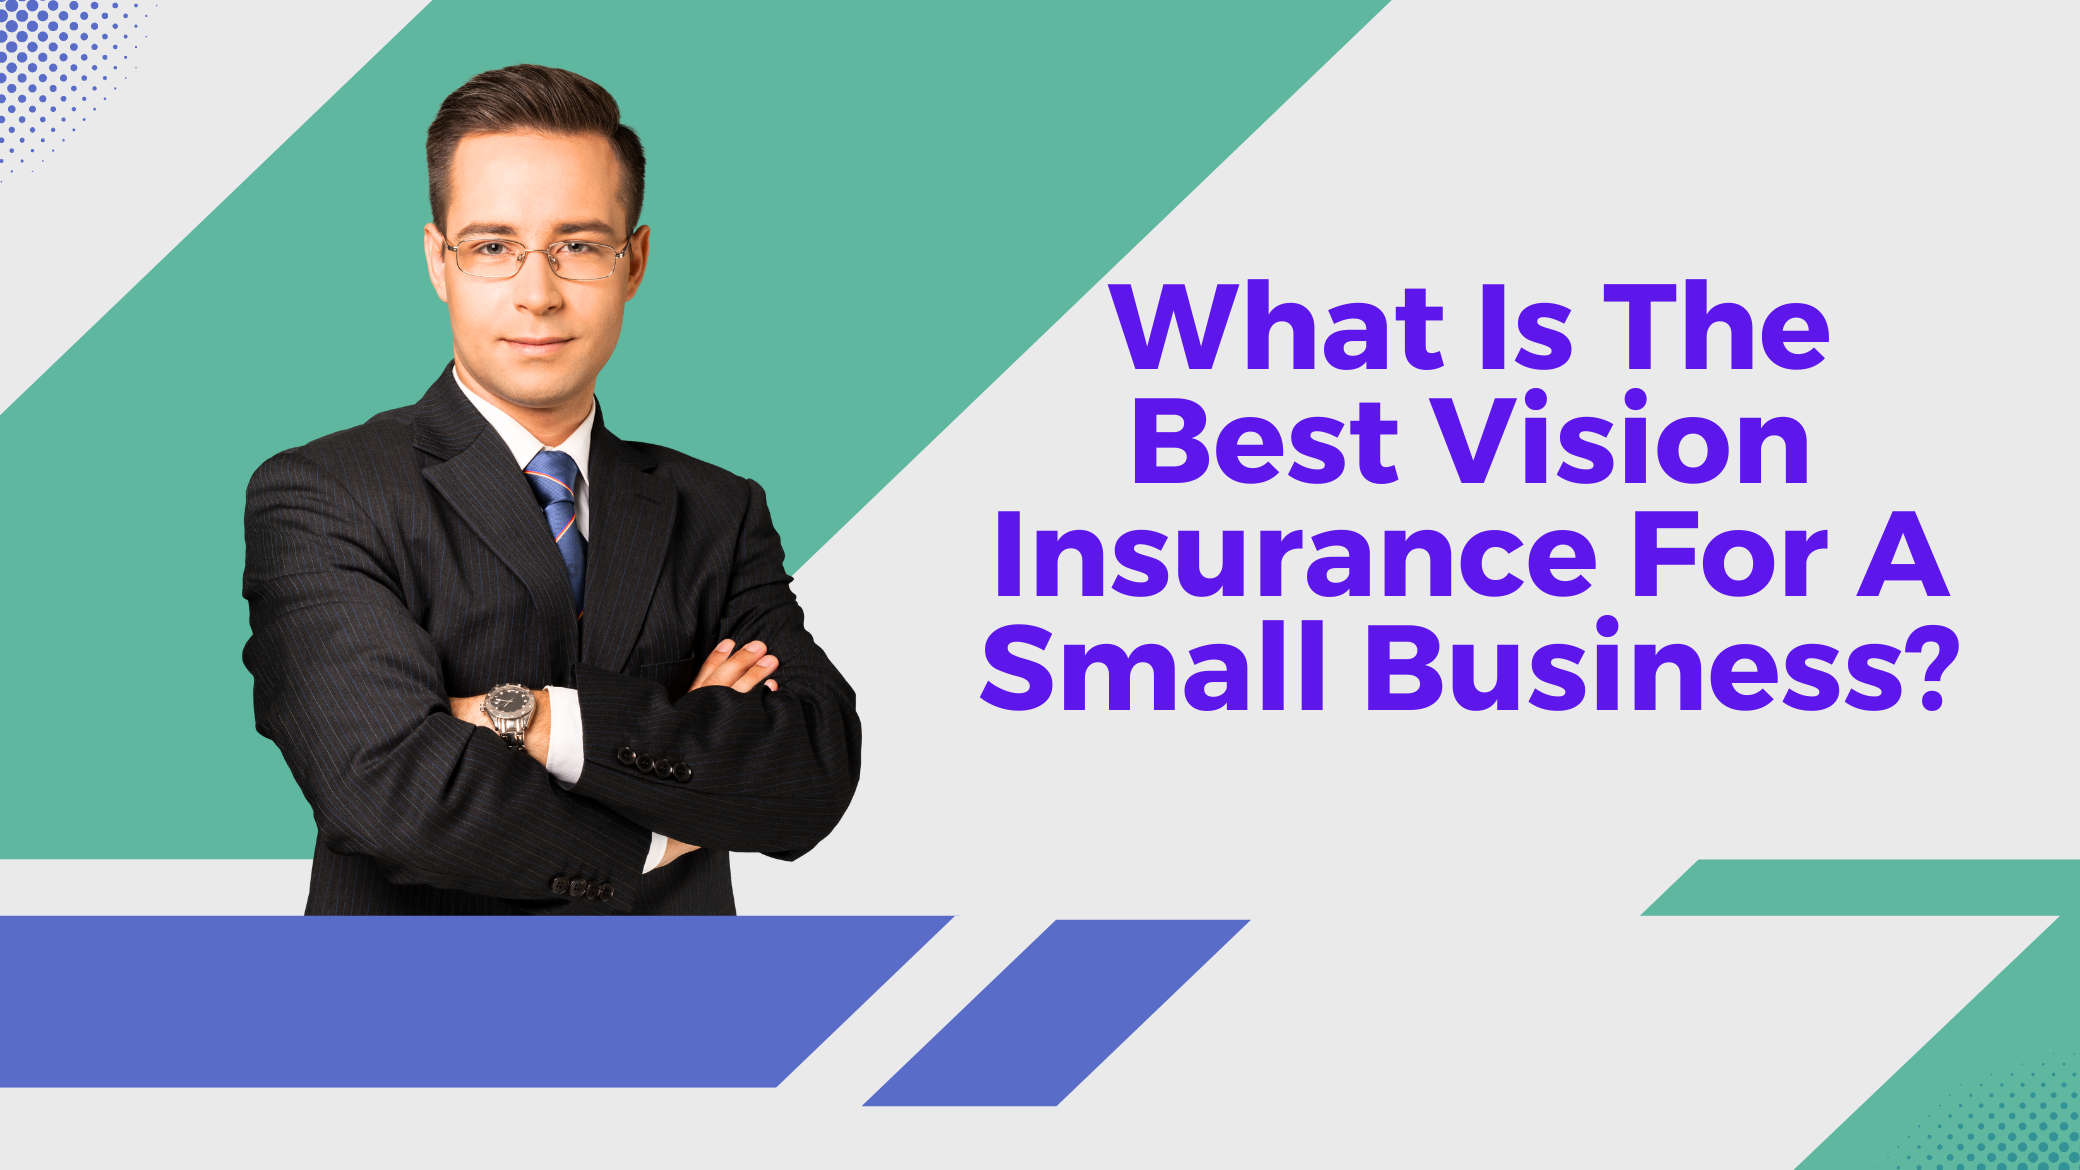 What Is The Best Vision Insurance For A Small Business